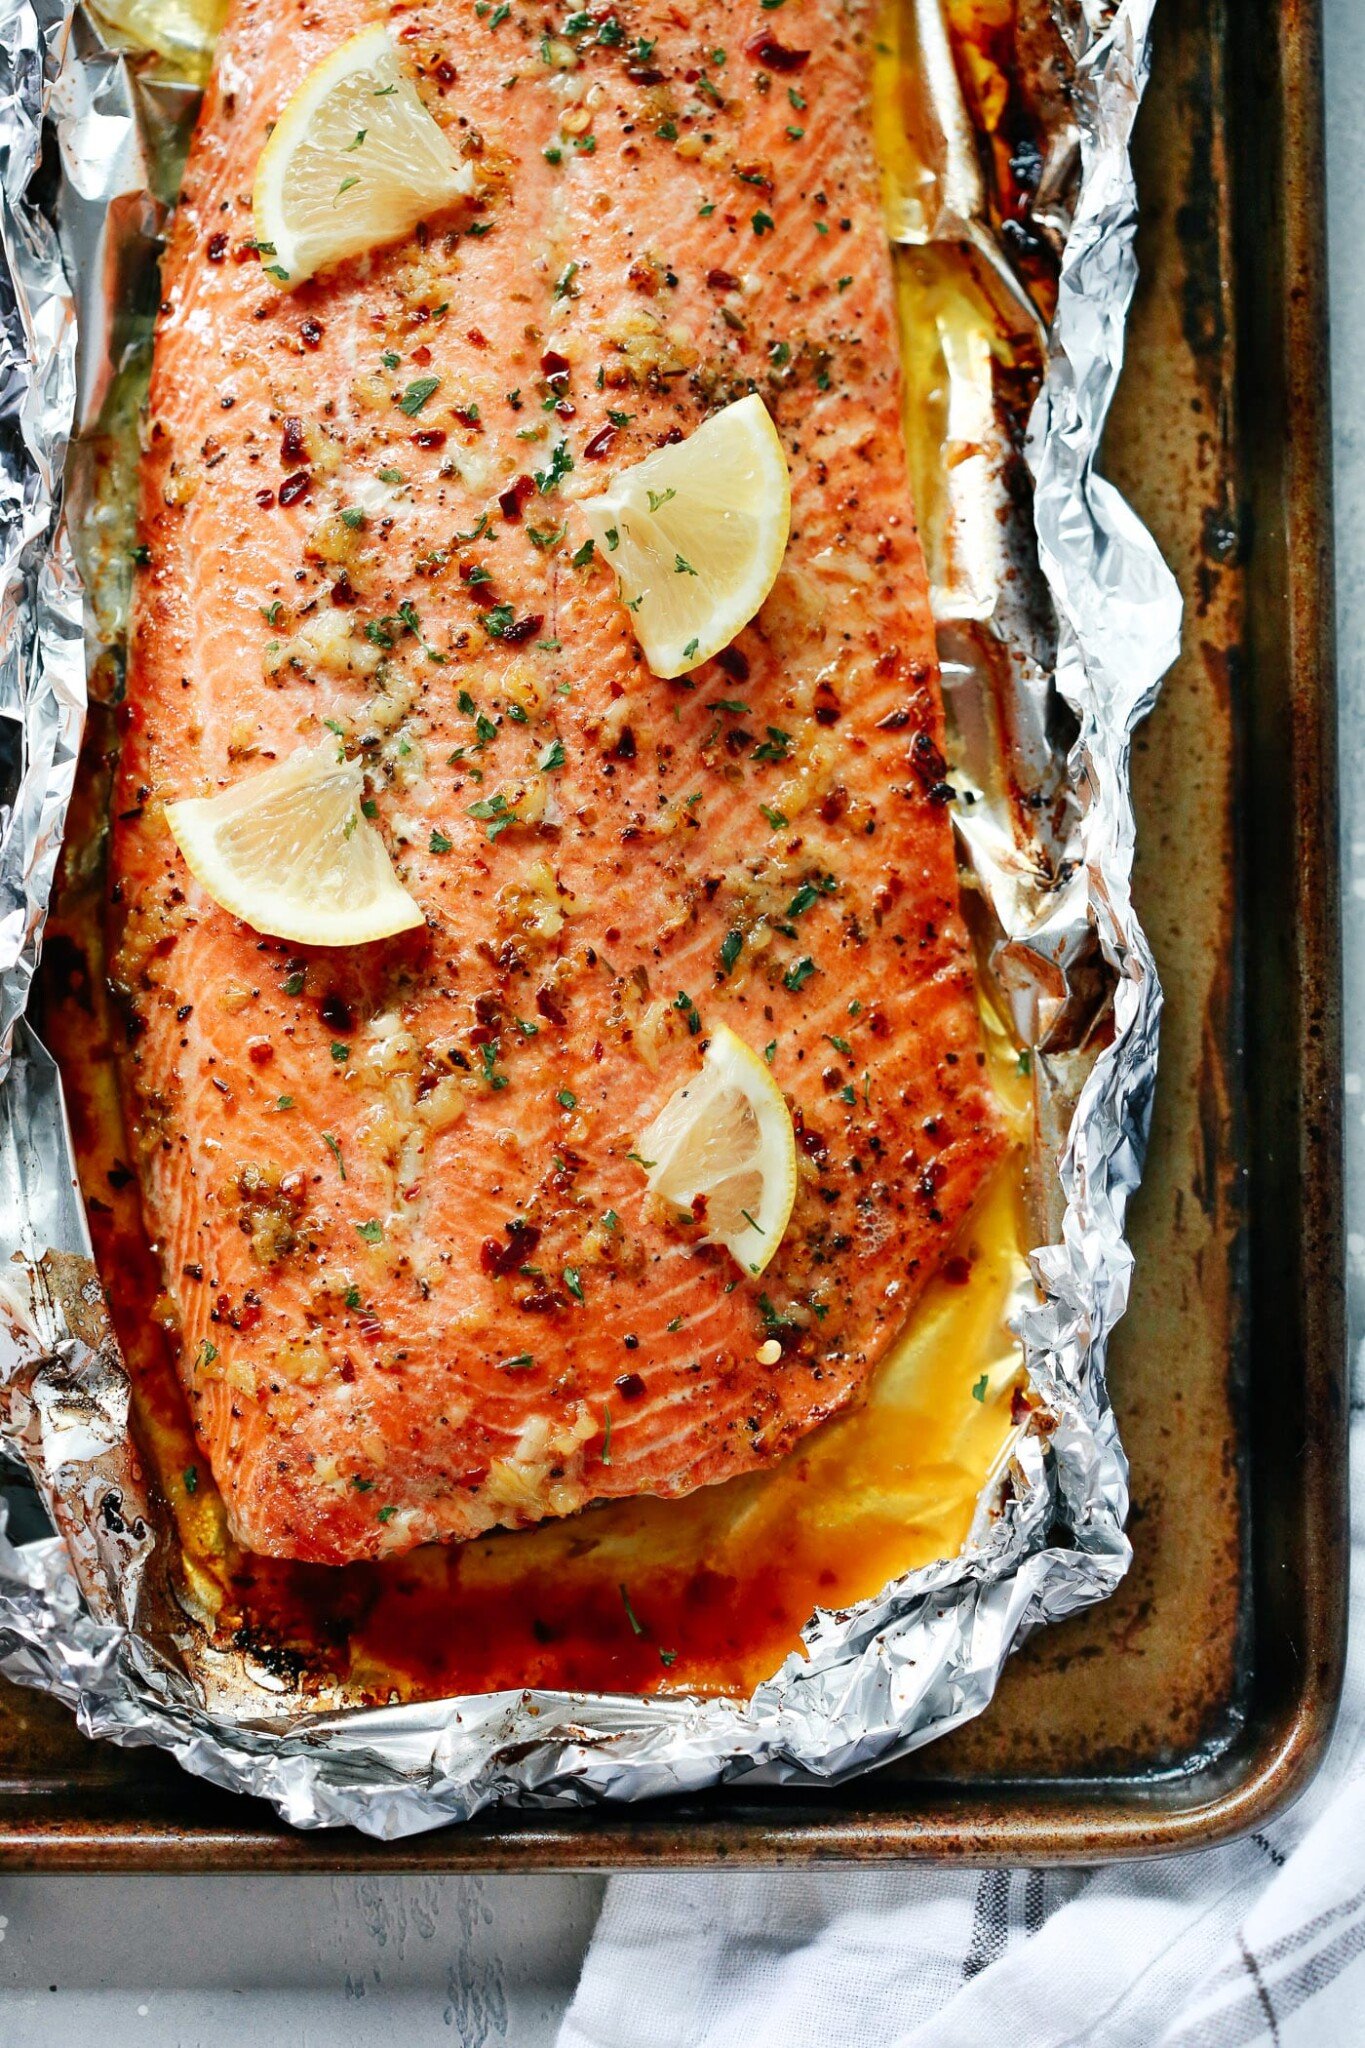 Baked Salmon Recipe with lemon slices and garlic butter